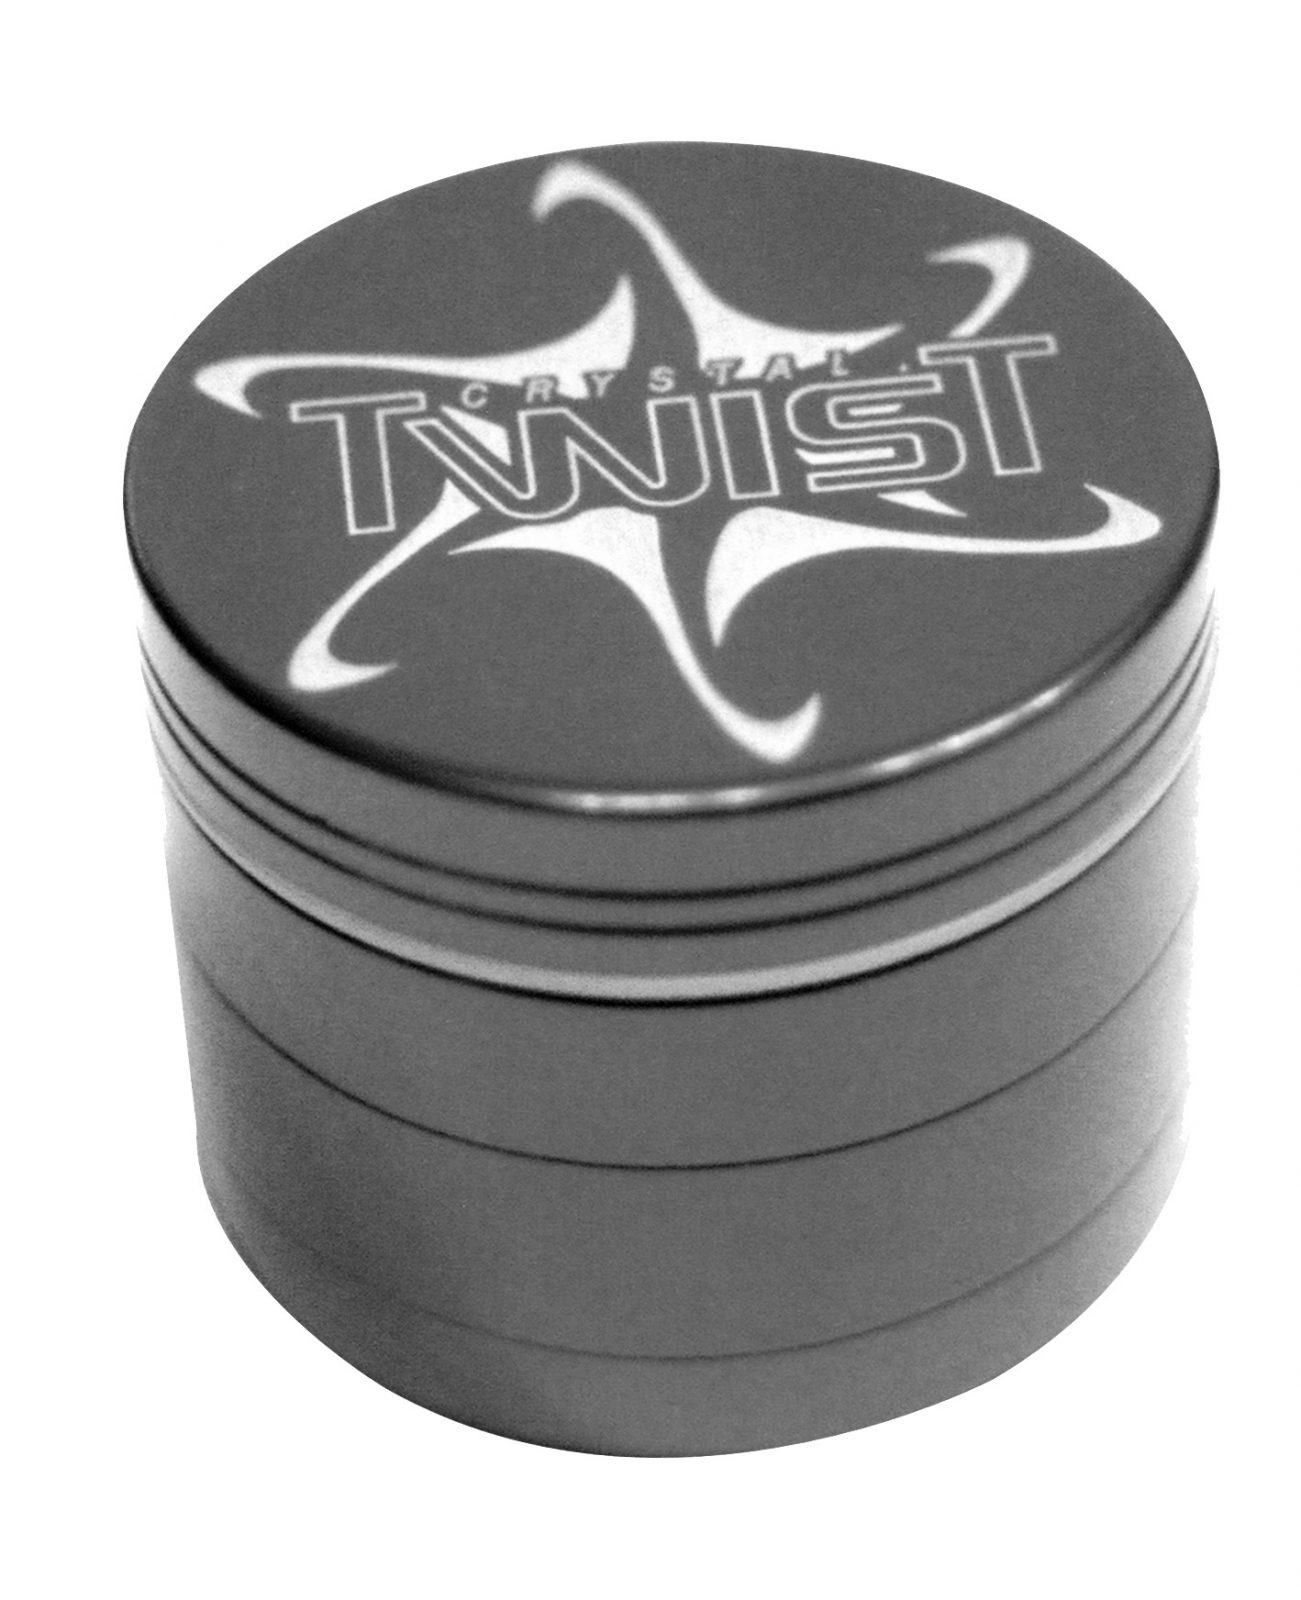 Red Eye Crystal Twist Small 40mm 5 Part Combo Aluminium Metal Herb Spice Grinder